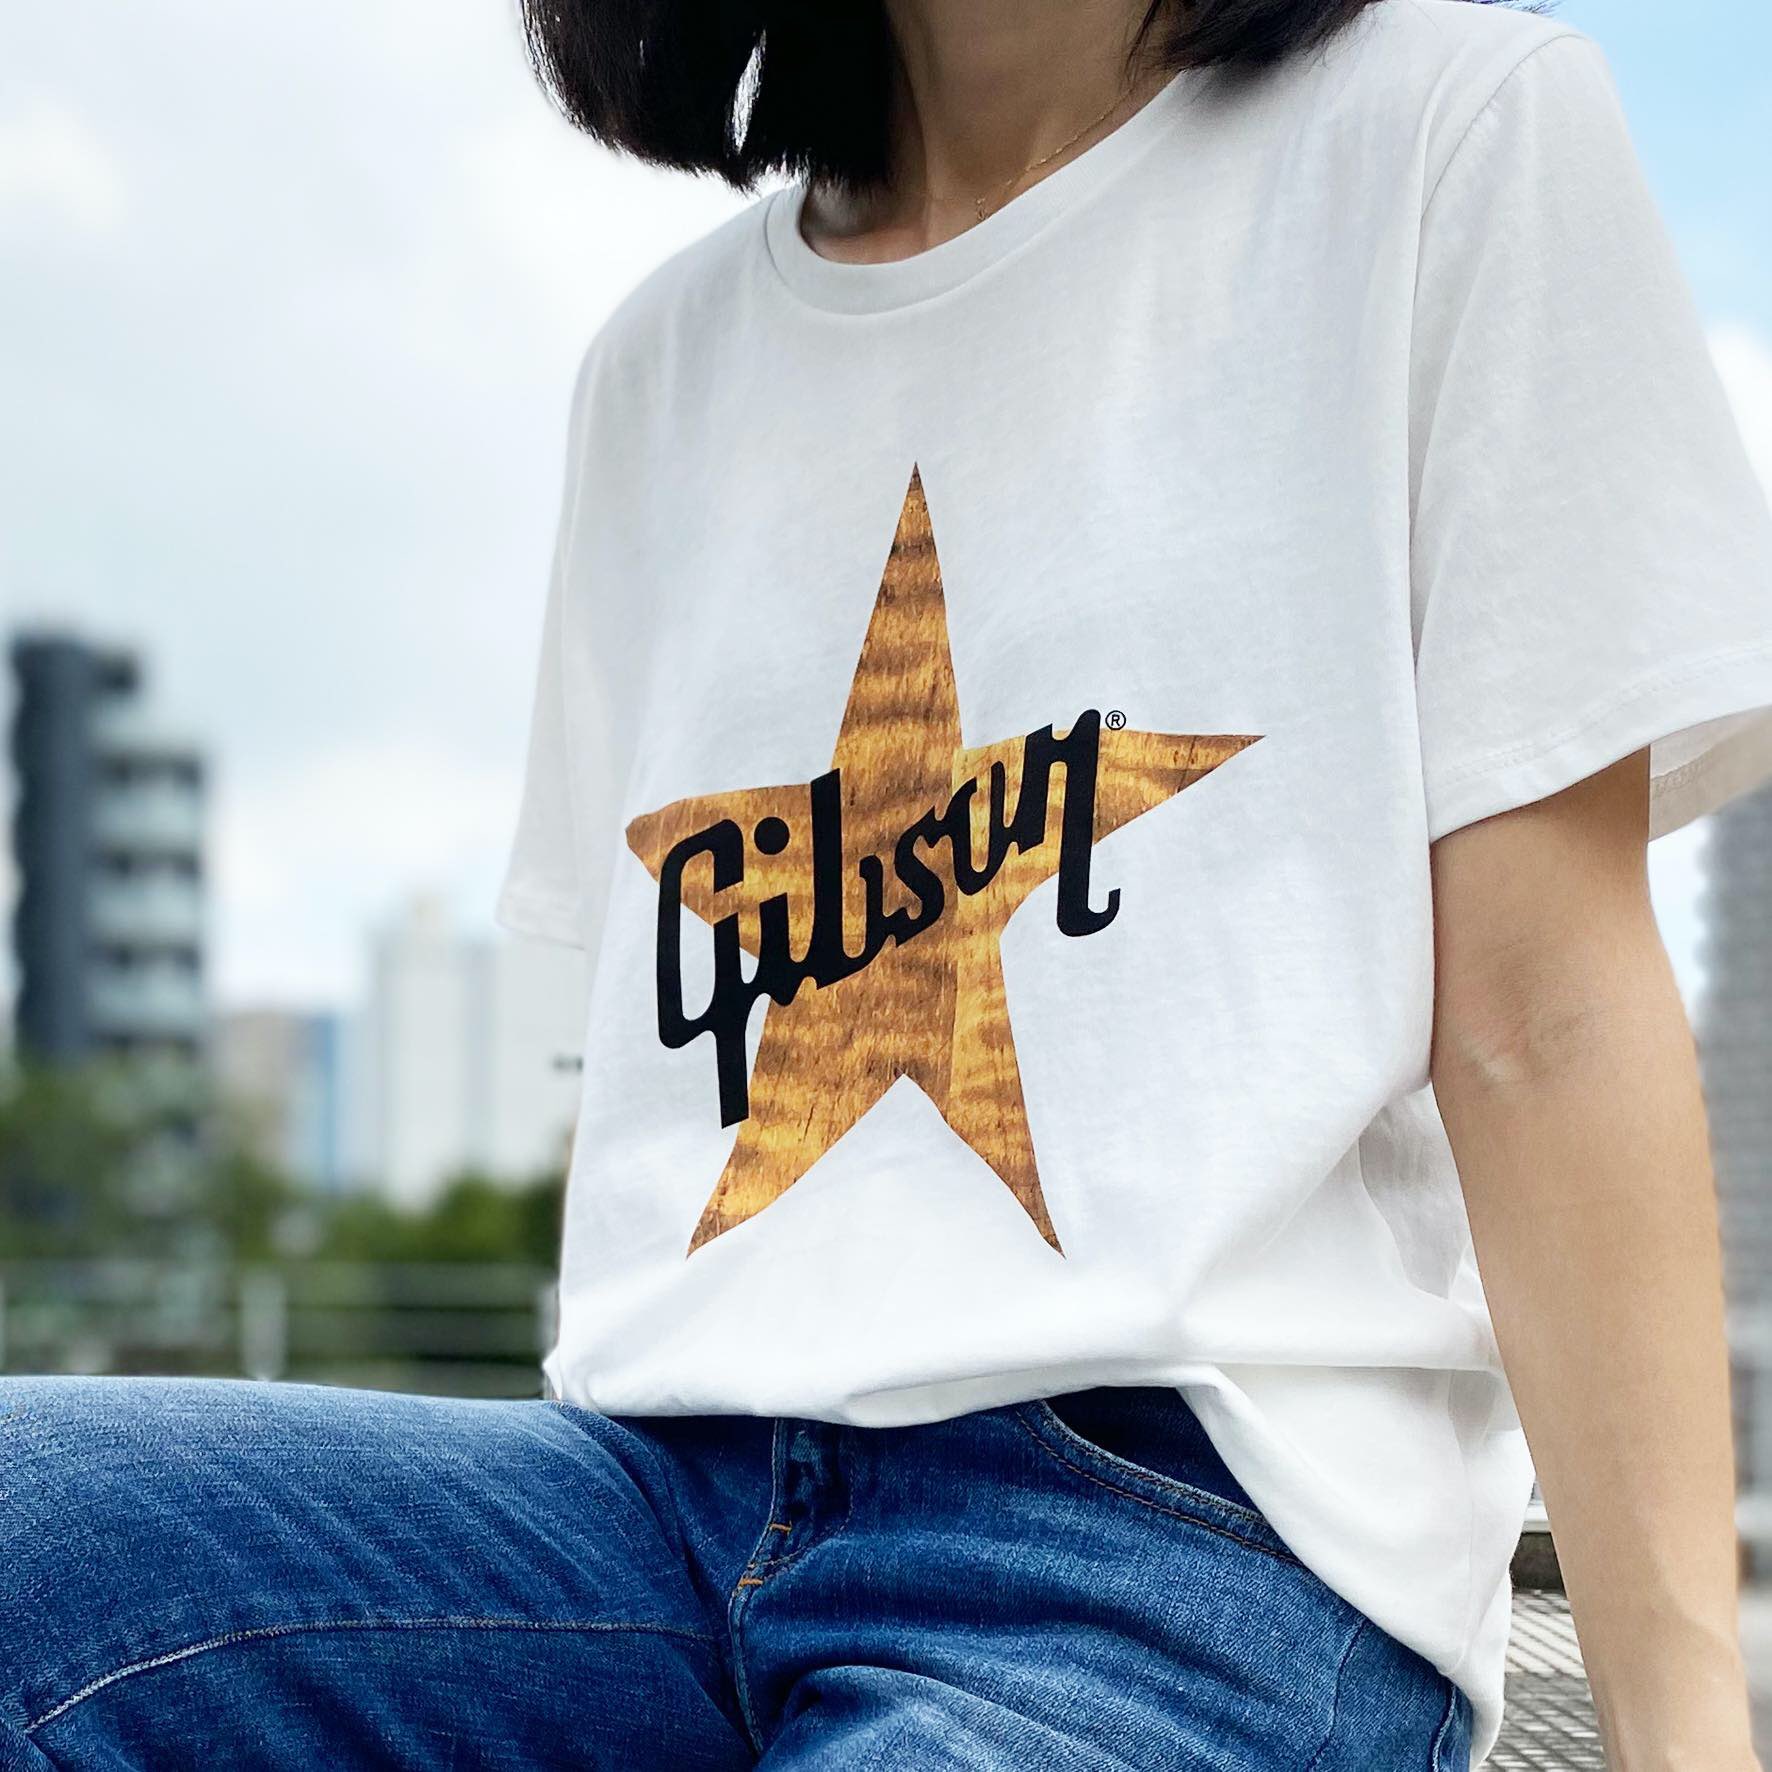 B'z公式SNS】B'z PARTY×Gibson オリジナルグッズ「Tシャツ Gibson Star 